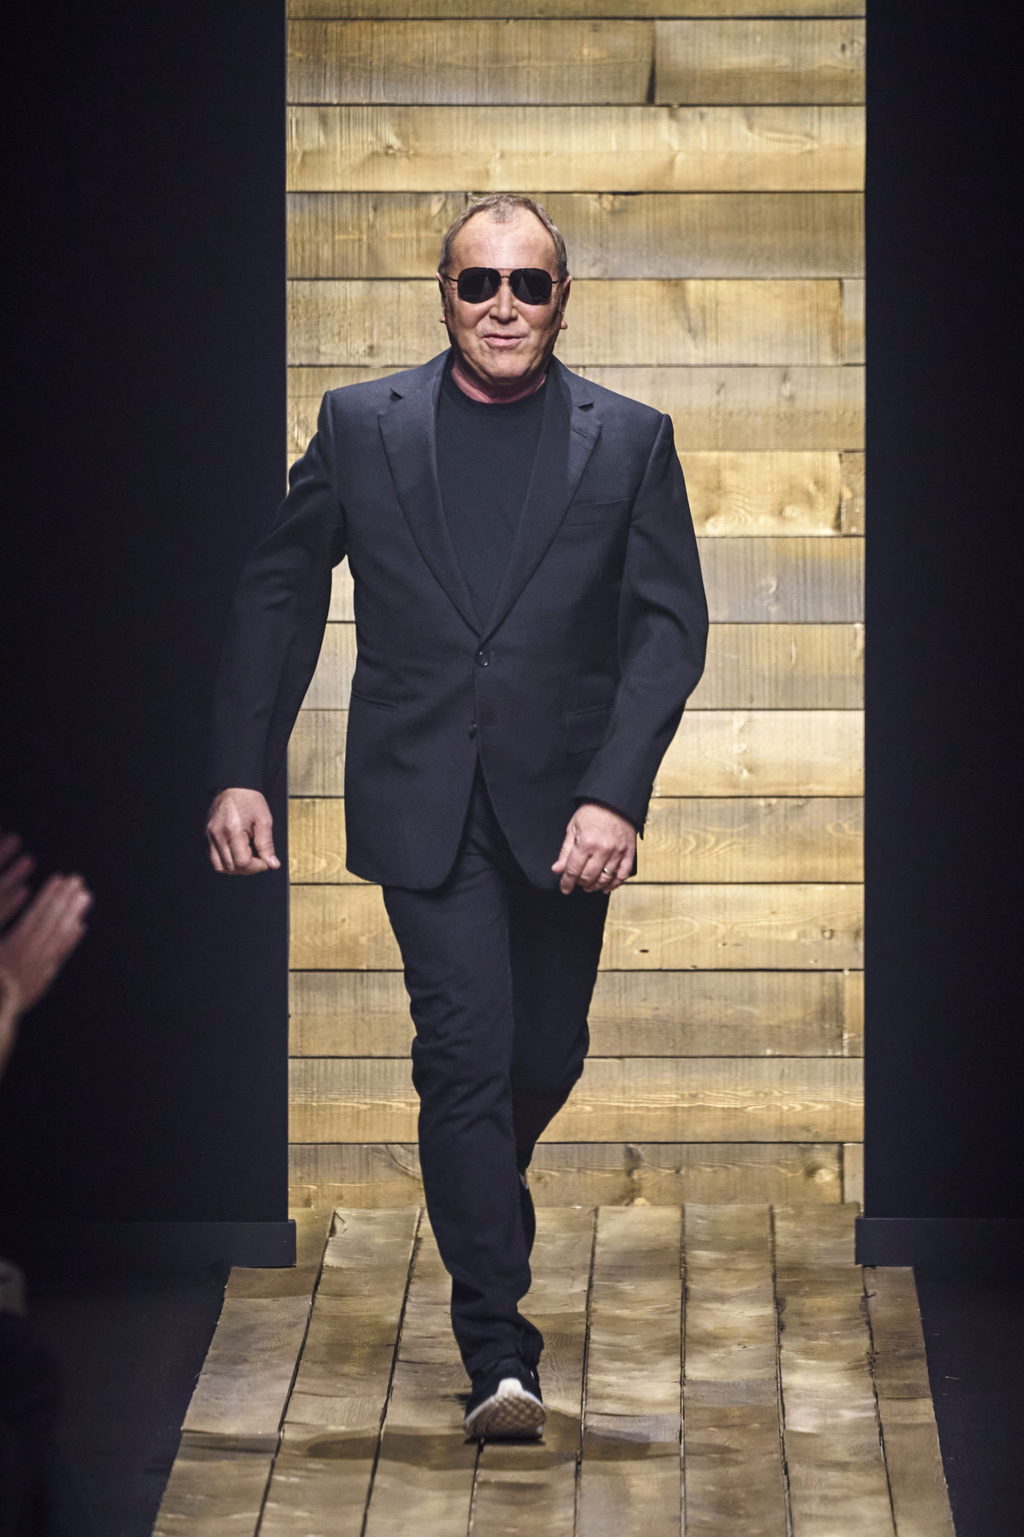 Is Michael Kors considered to be a top designer brand? - Quora